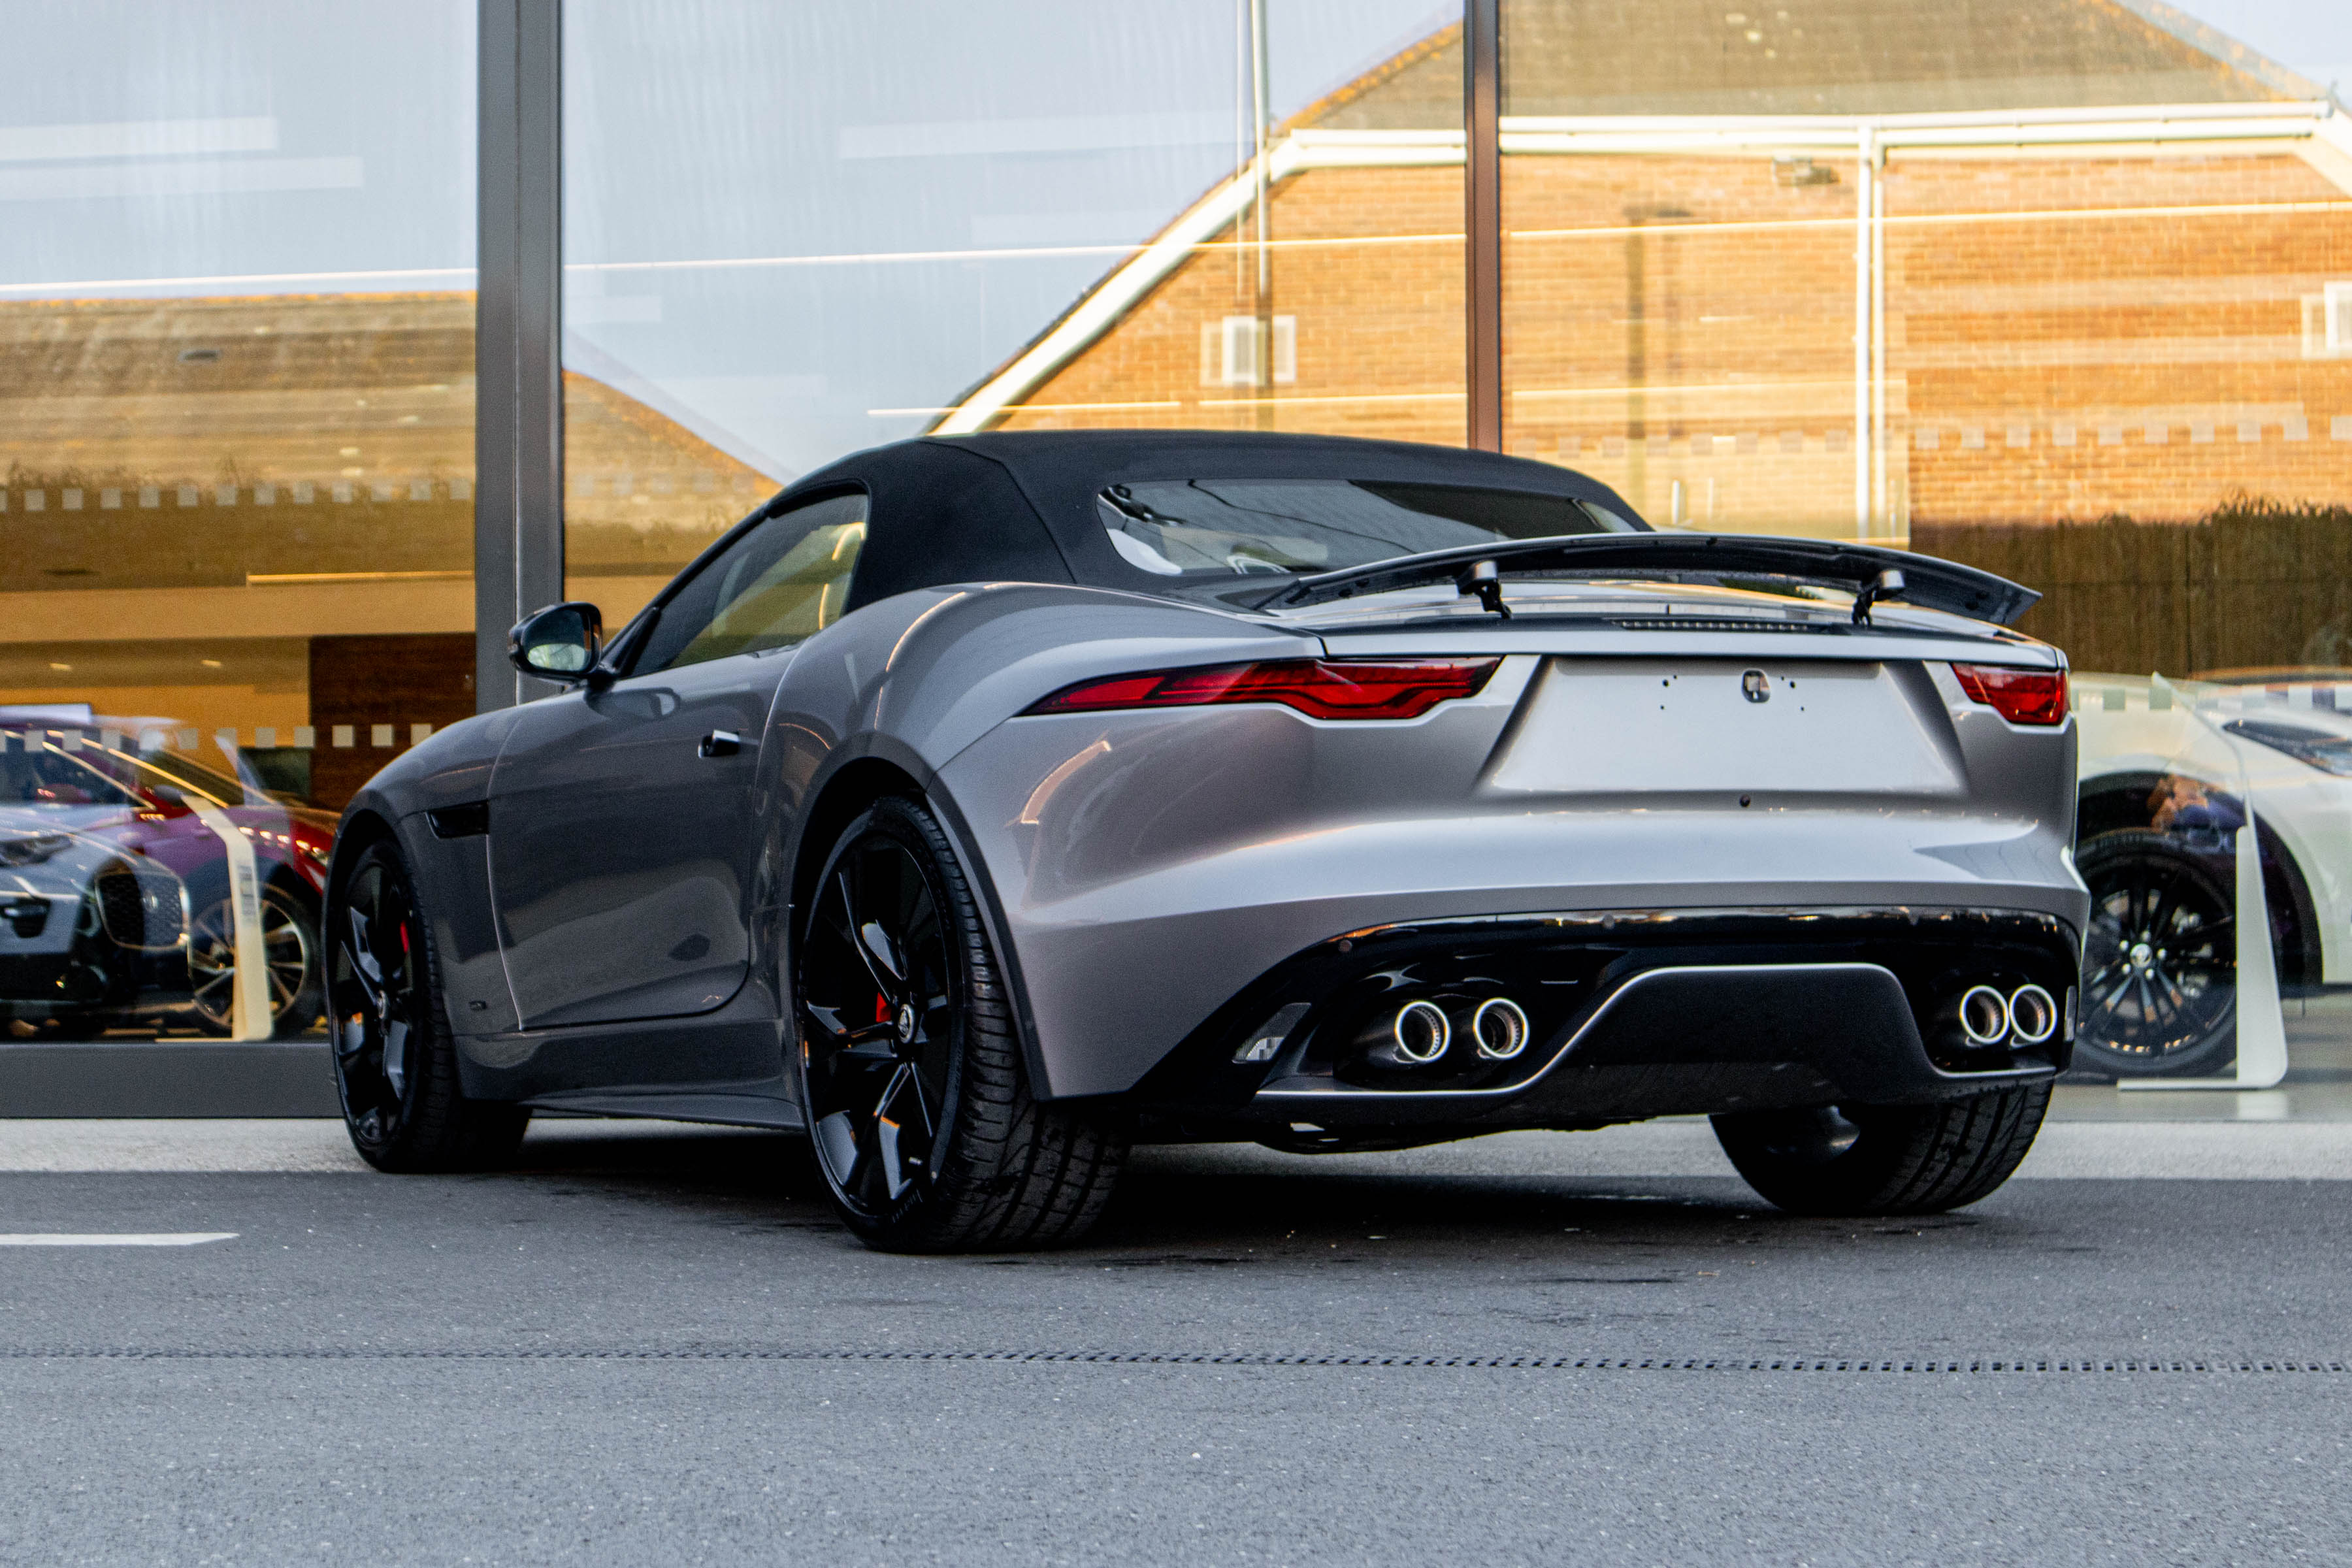 F-TYPE 5.0 P450 SUPERCHARGED V8 75 PLUS 2DR AUTO CONVERTIBLE